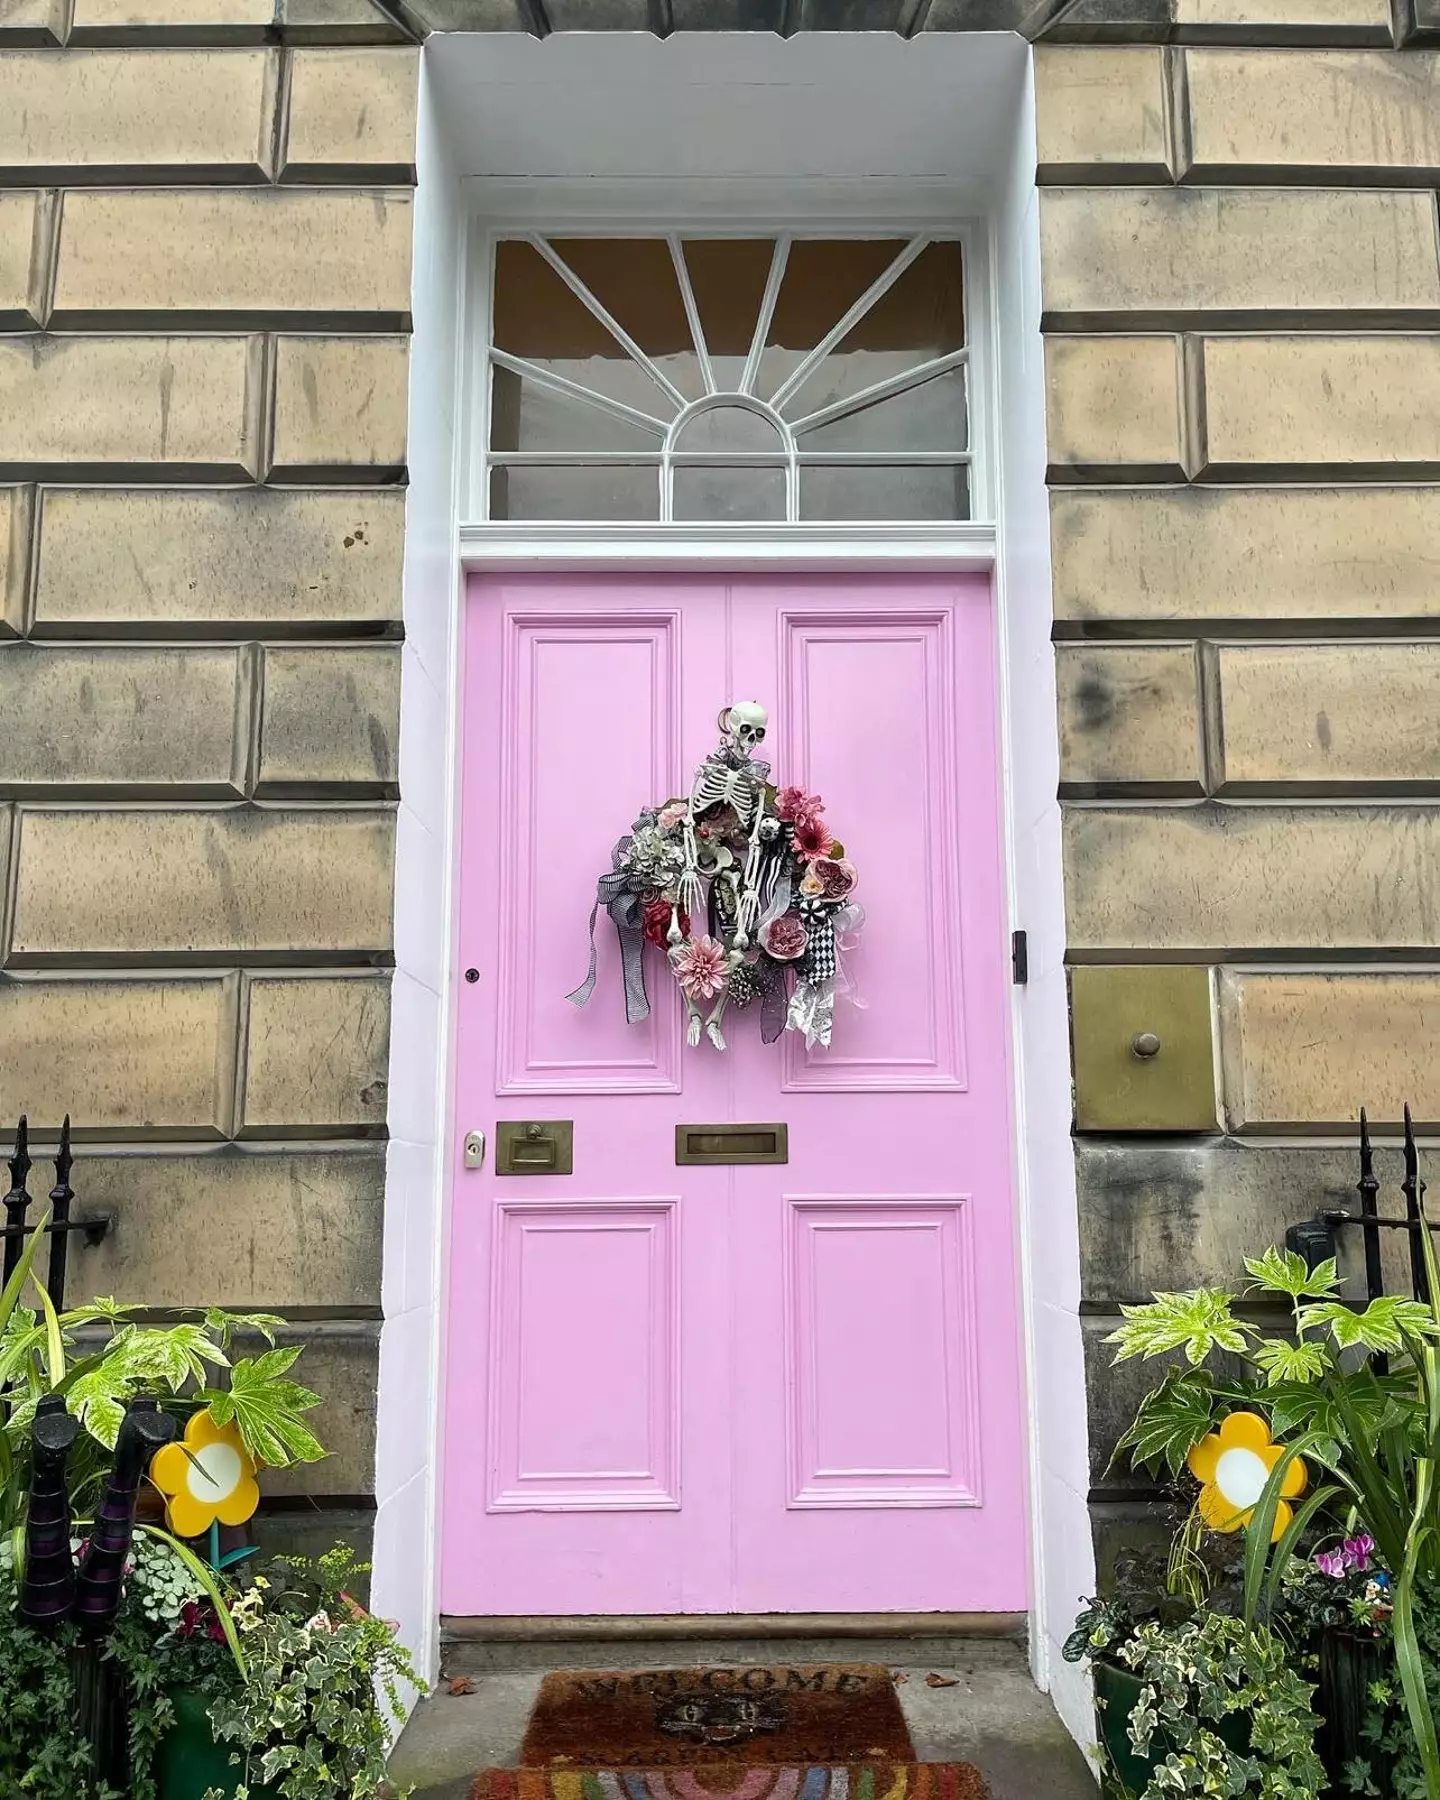 The pink door certainly stands out.